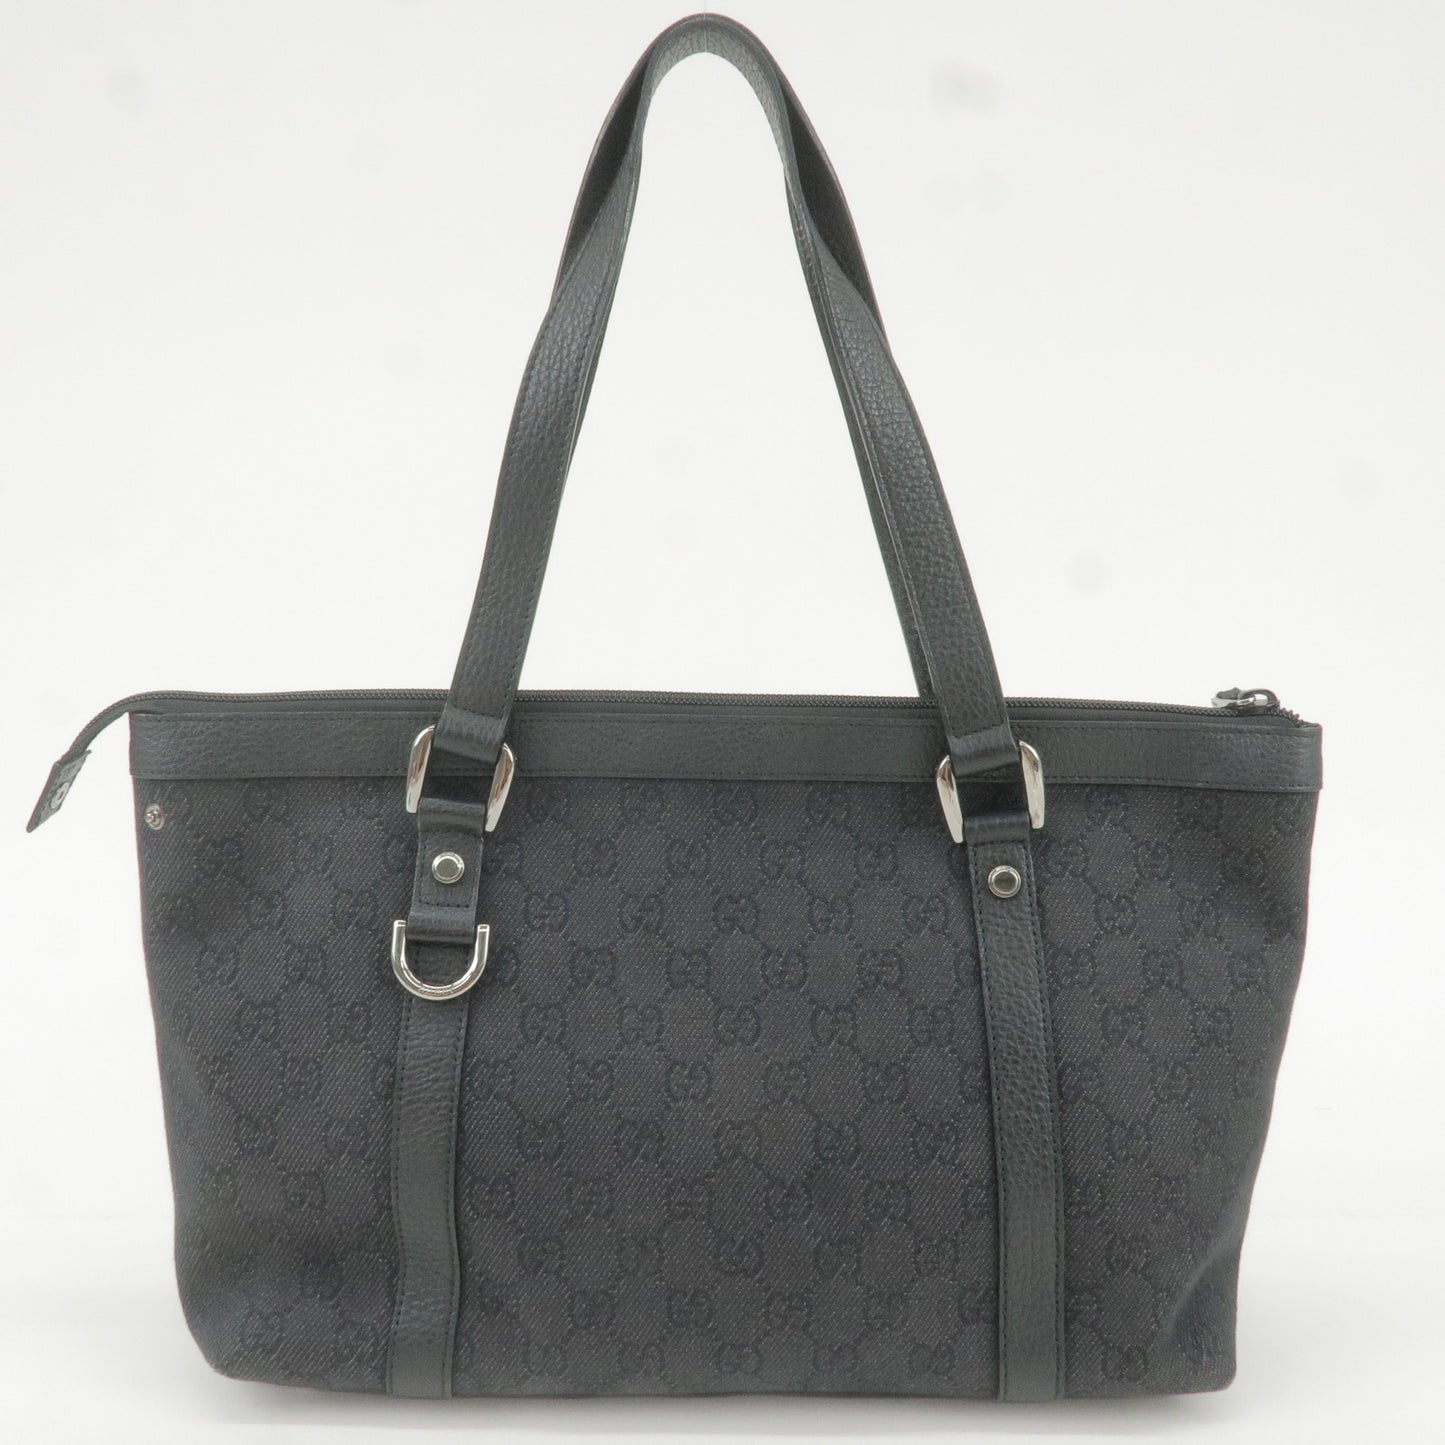 GUCCI Abbey GG Canvas Leather Tote Bag Hand Bag Black 268640